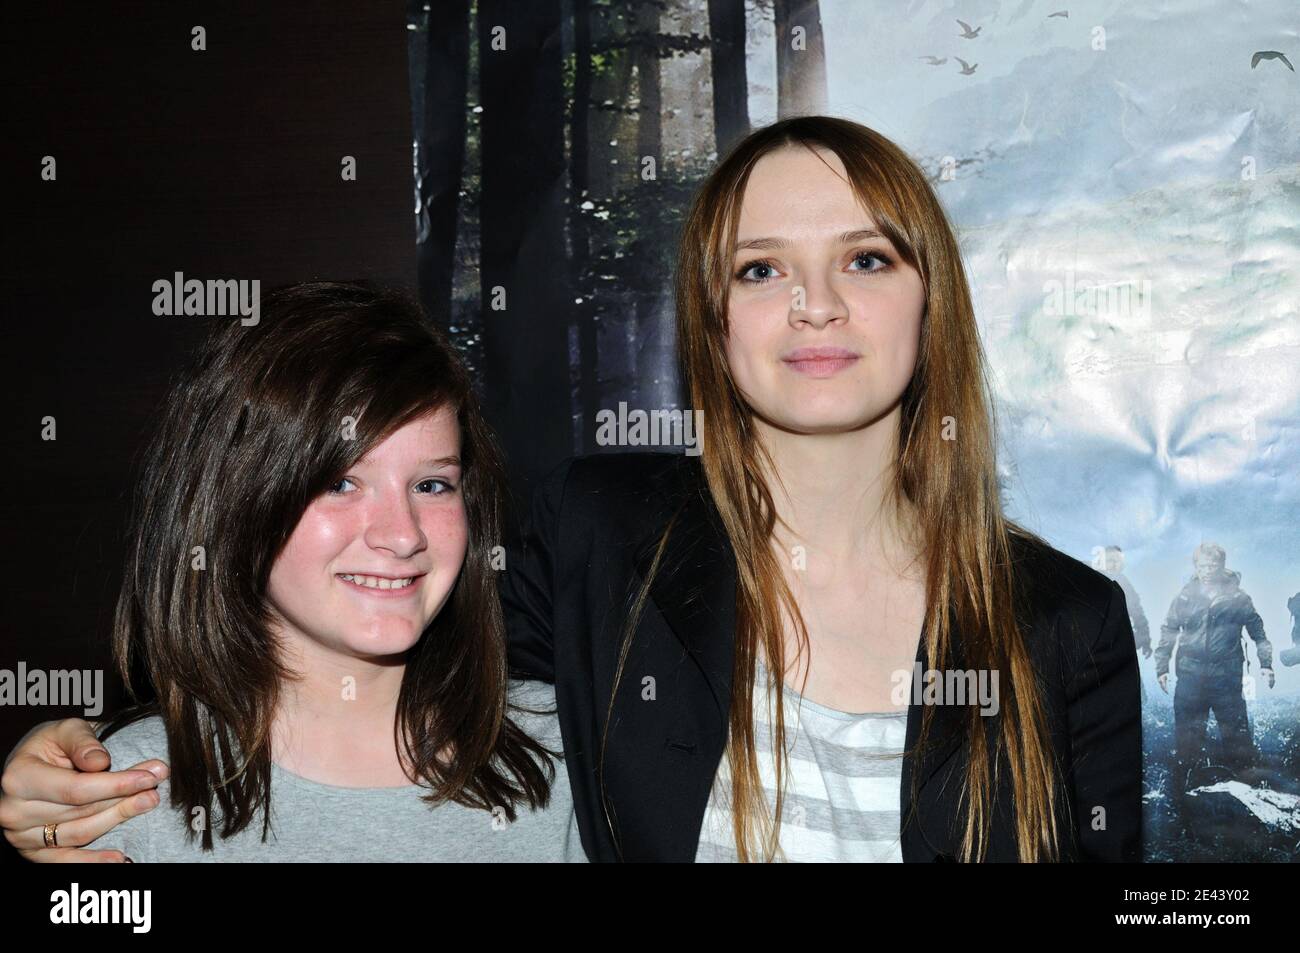 Marion Tournier and Sara Forestier attending the premiere of Humains as part of the Troyes 'Premiere Marche' Film Festival in Troyes, France on April 10, 2009. Photo by Helder Januario/ABACAPRESS.COM Stock Photo